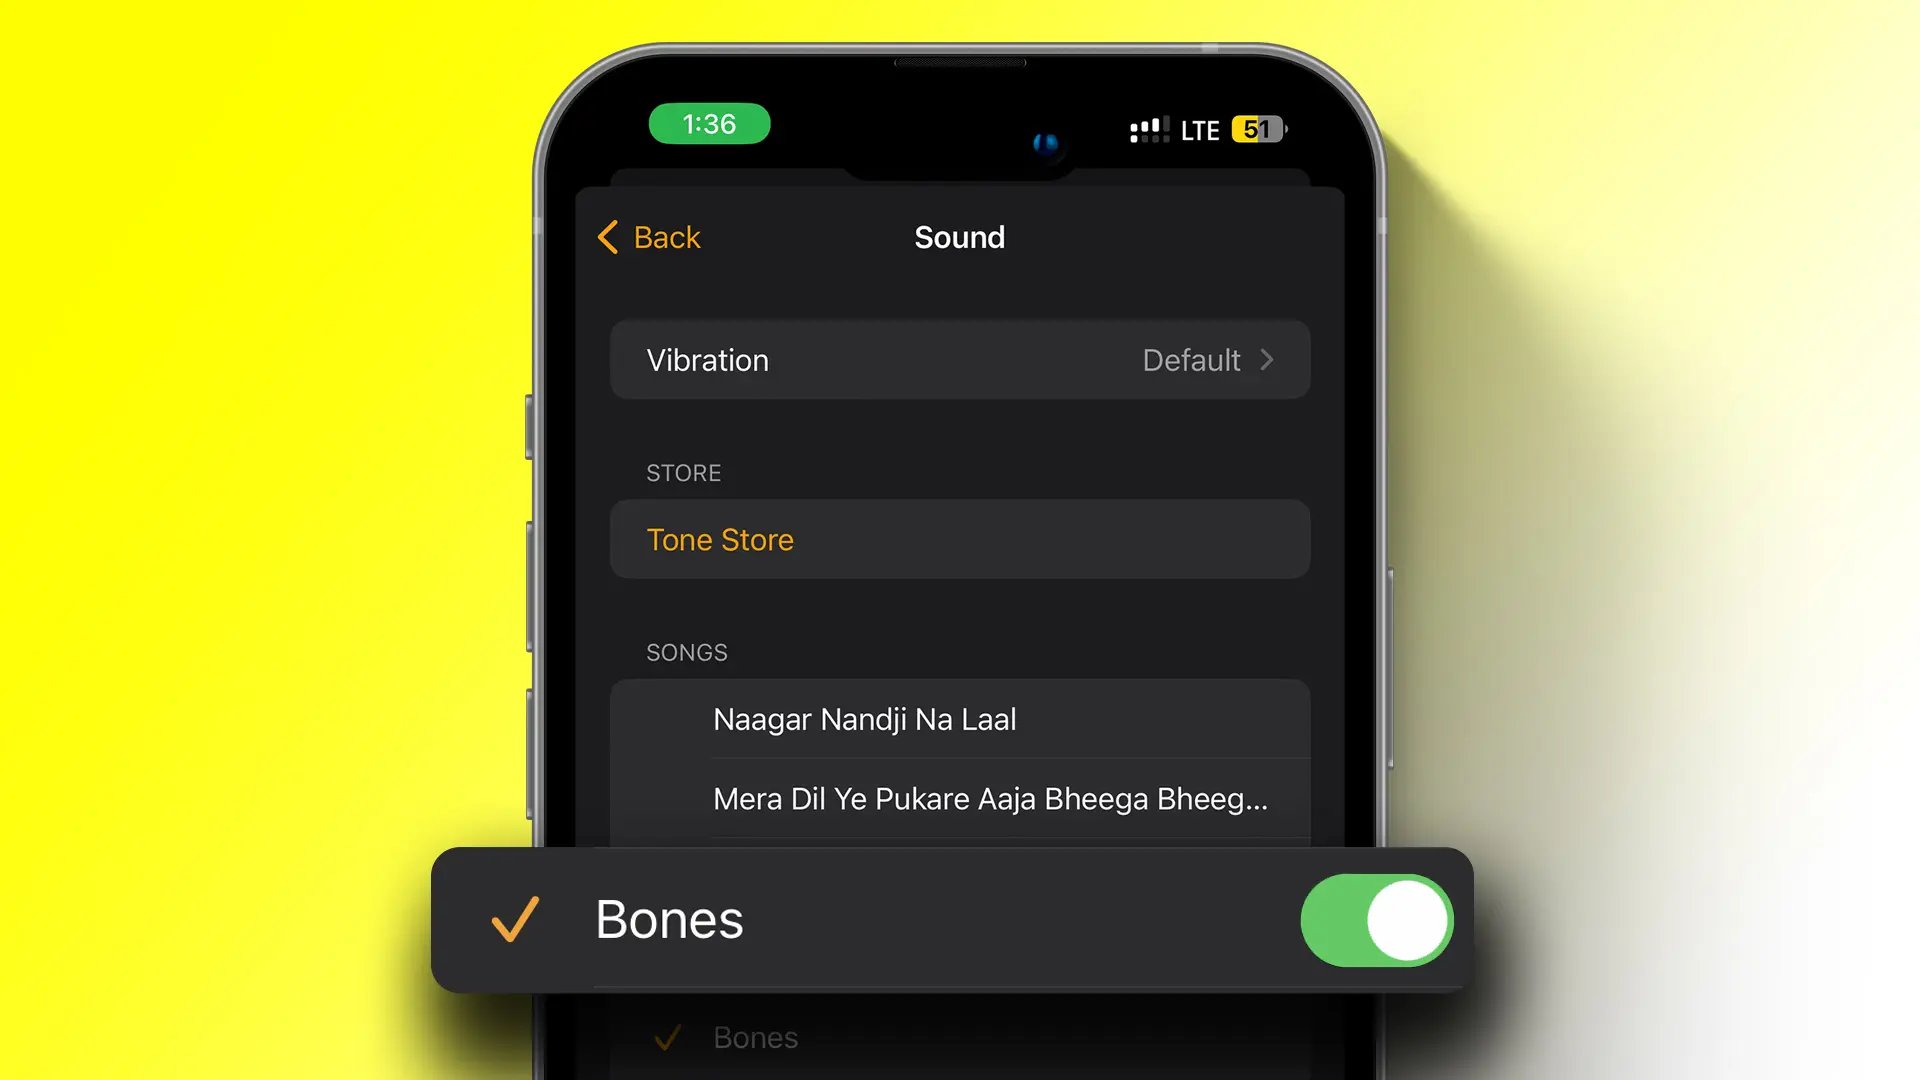 customizing-alarm-sound-changing-the-alarm-sound-on-your-iphone-11